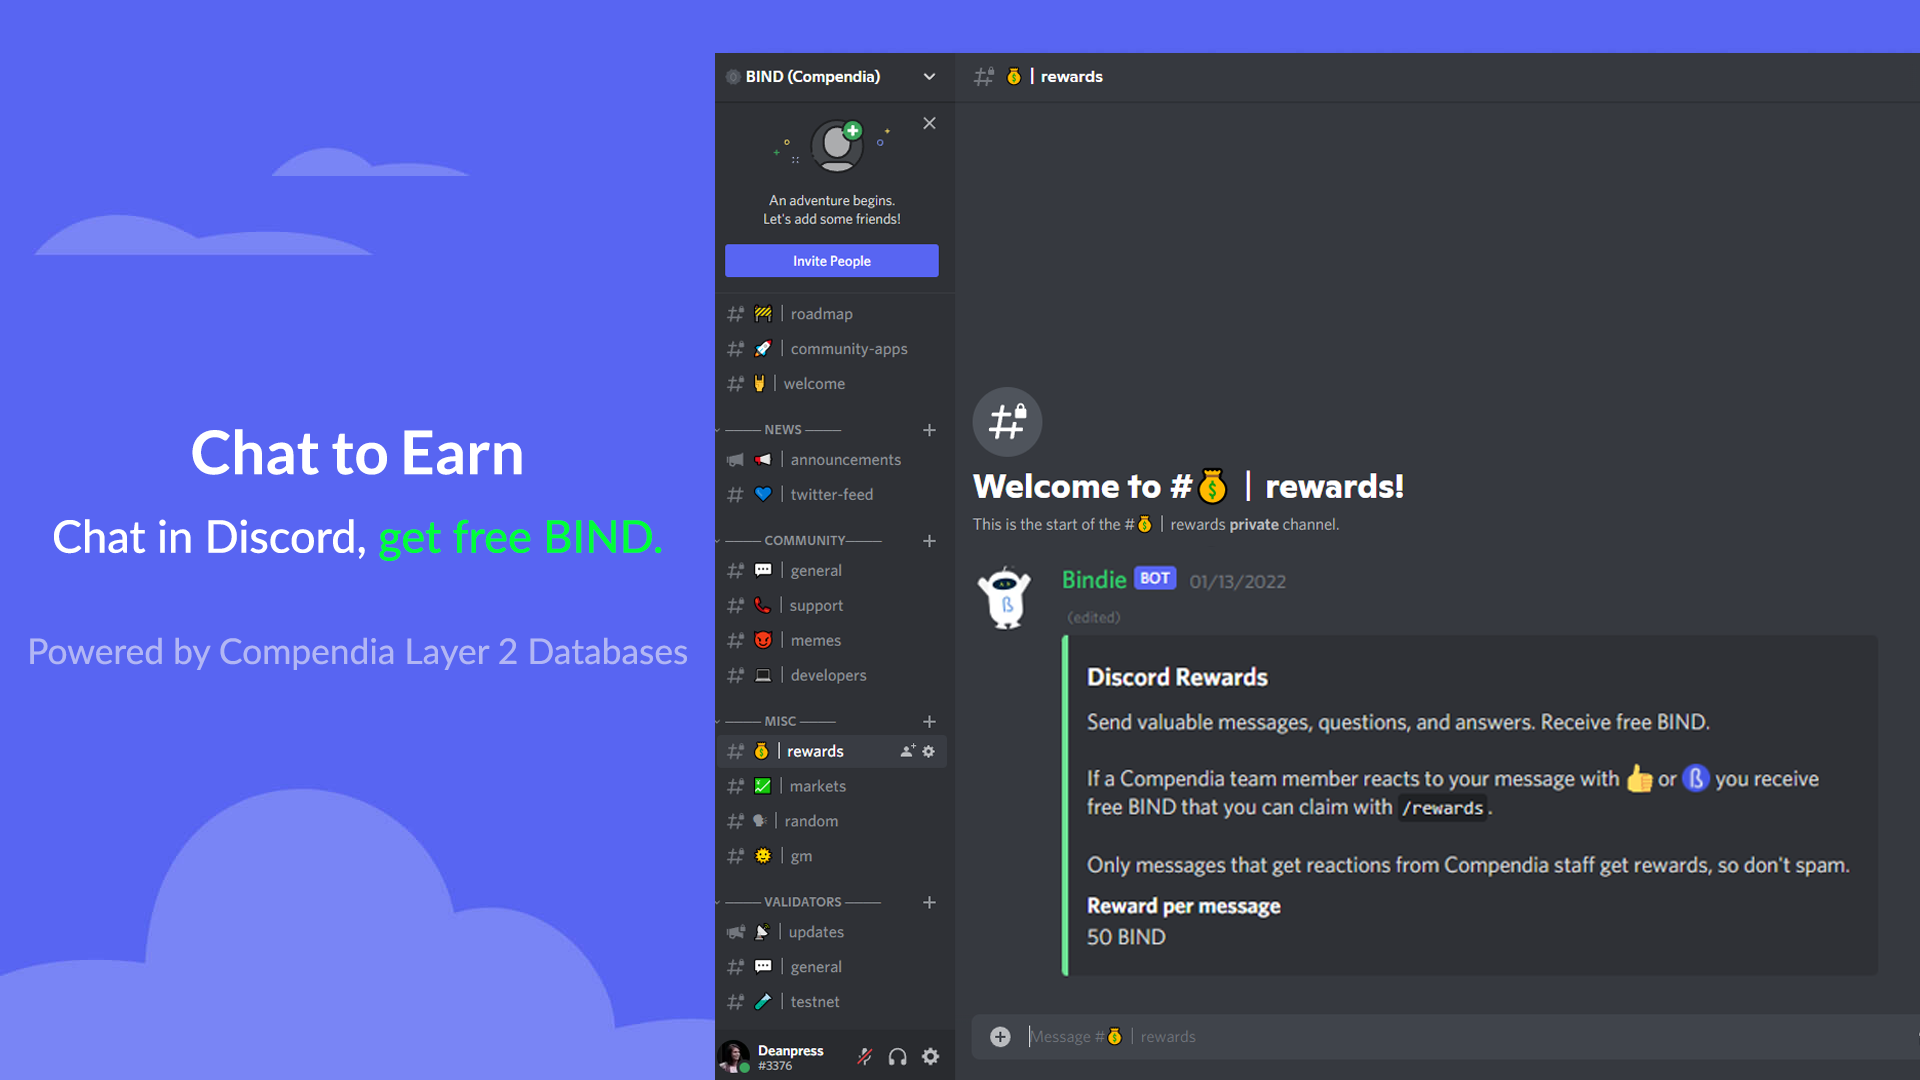 Chat To Earn: Get free BIND on Discord